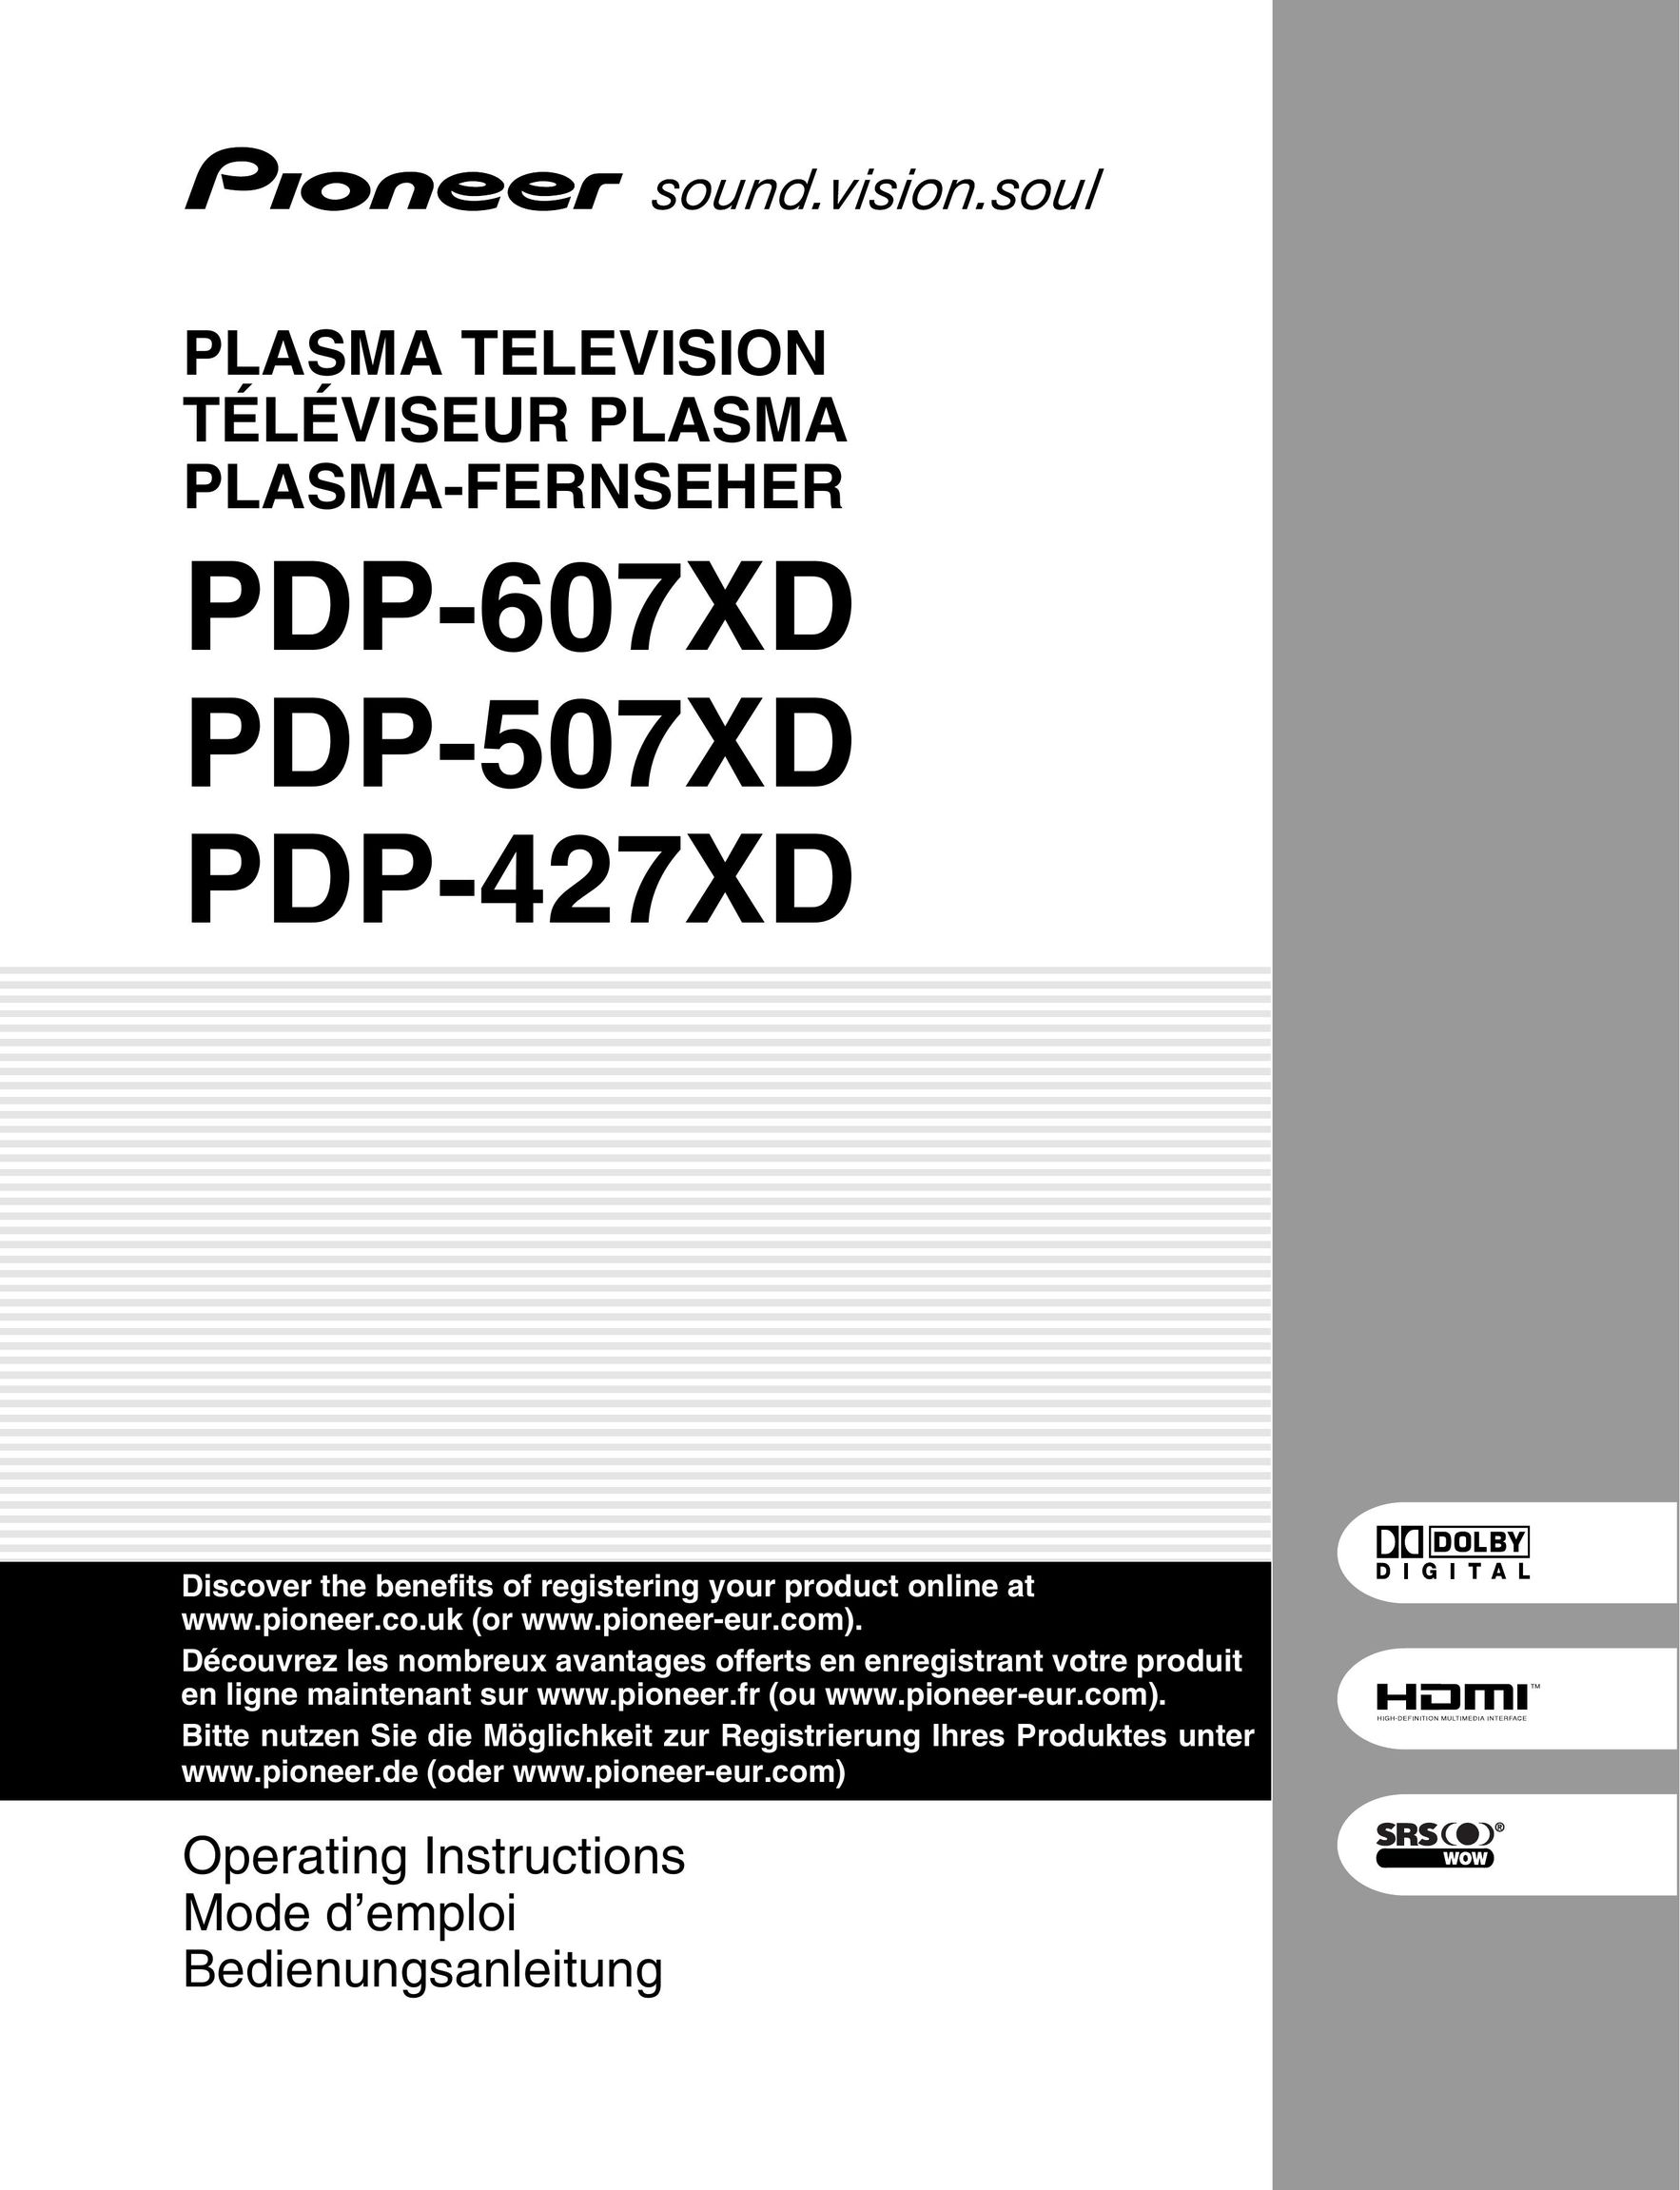 Pioneer PDP-507XD Flat Panel Television User Manual